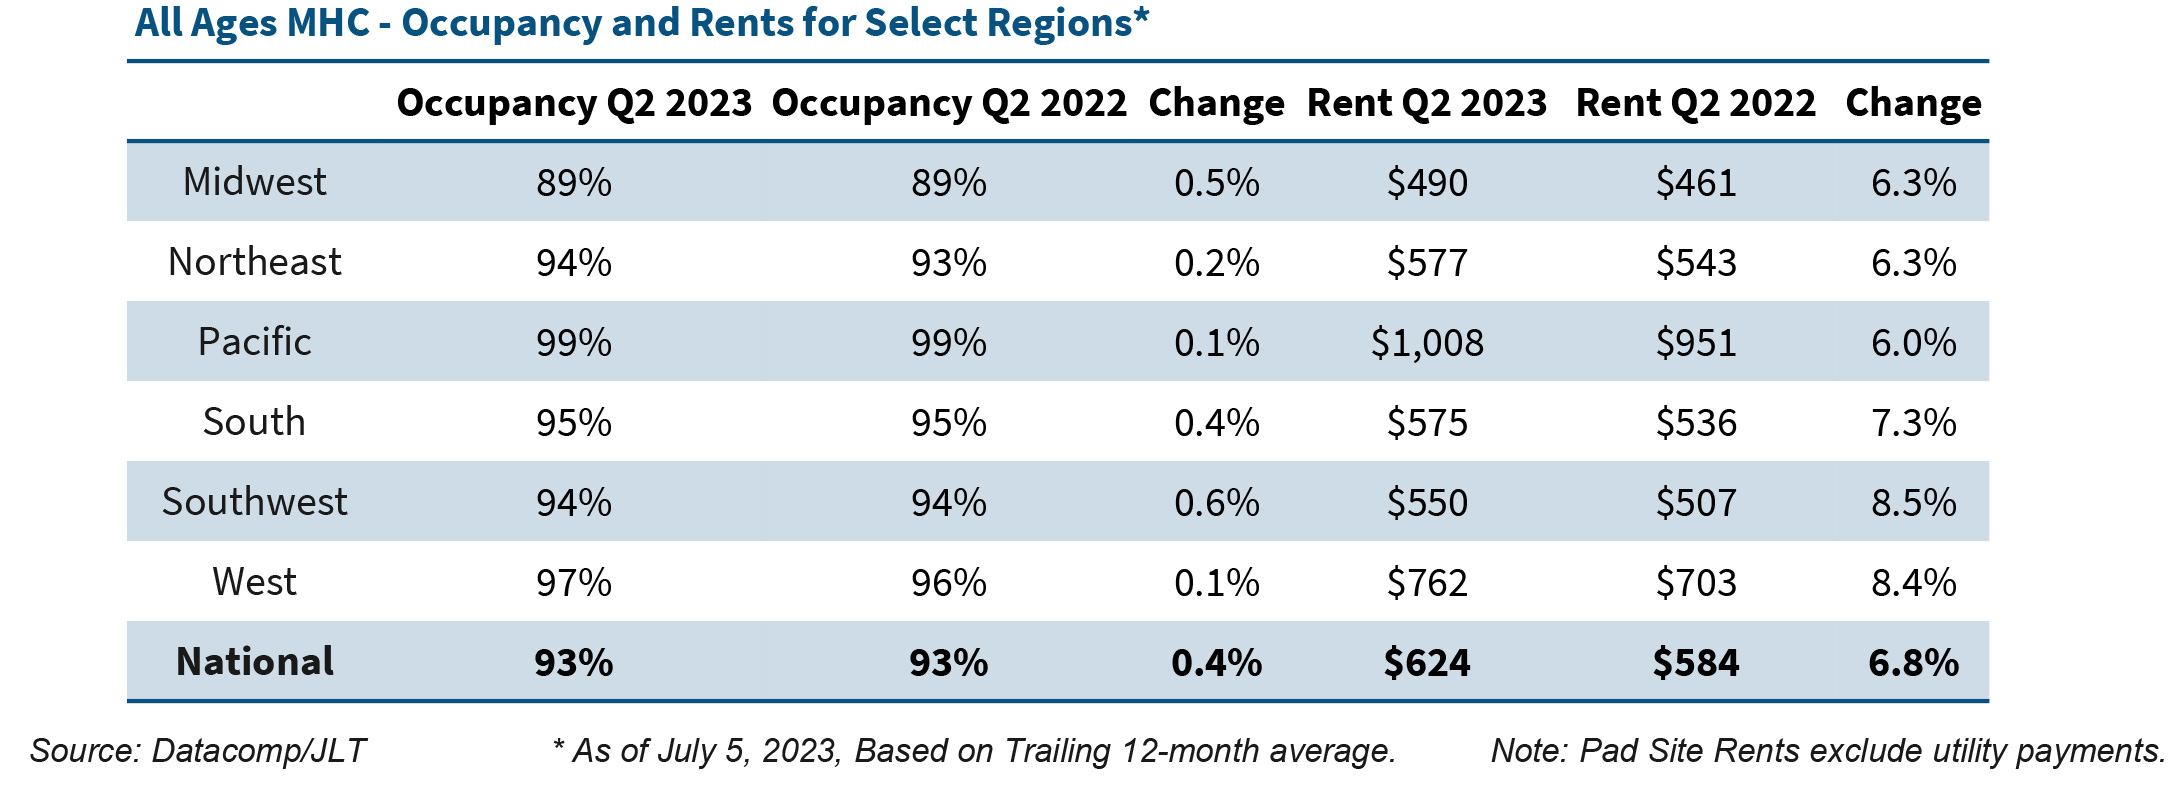 All Ages MHC - Occupancy and Rents for Select Regions* 